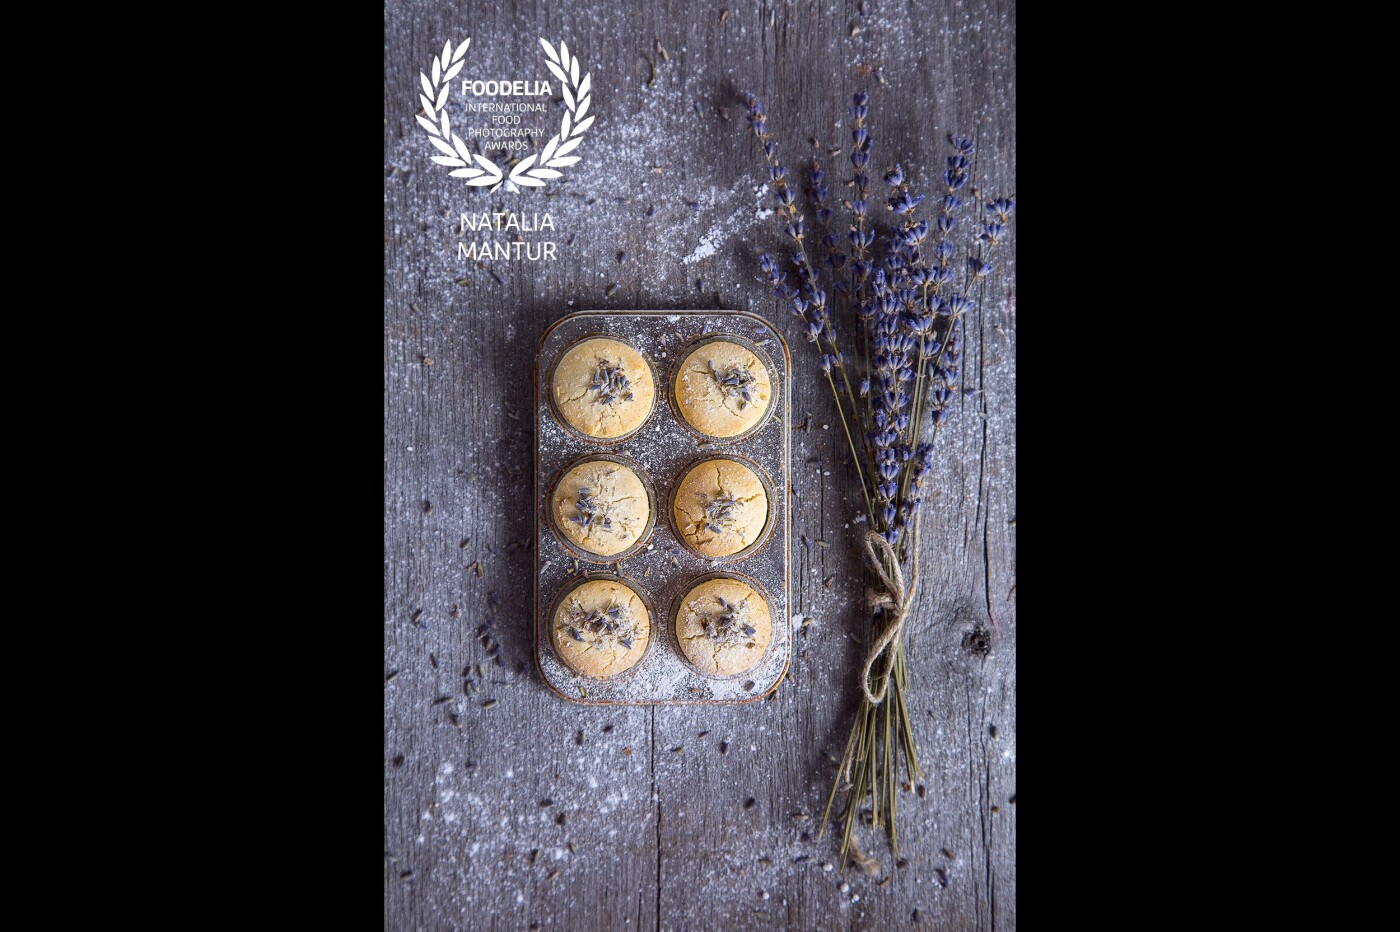 Lemon-lavender shortbread cookies, delicious and gluten-free, an absolute must try!!!<br />
The picture will be featured in a cook book.